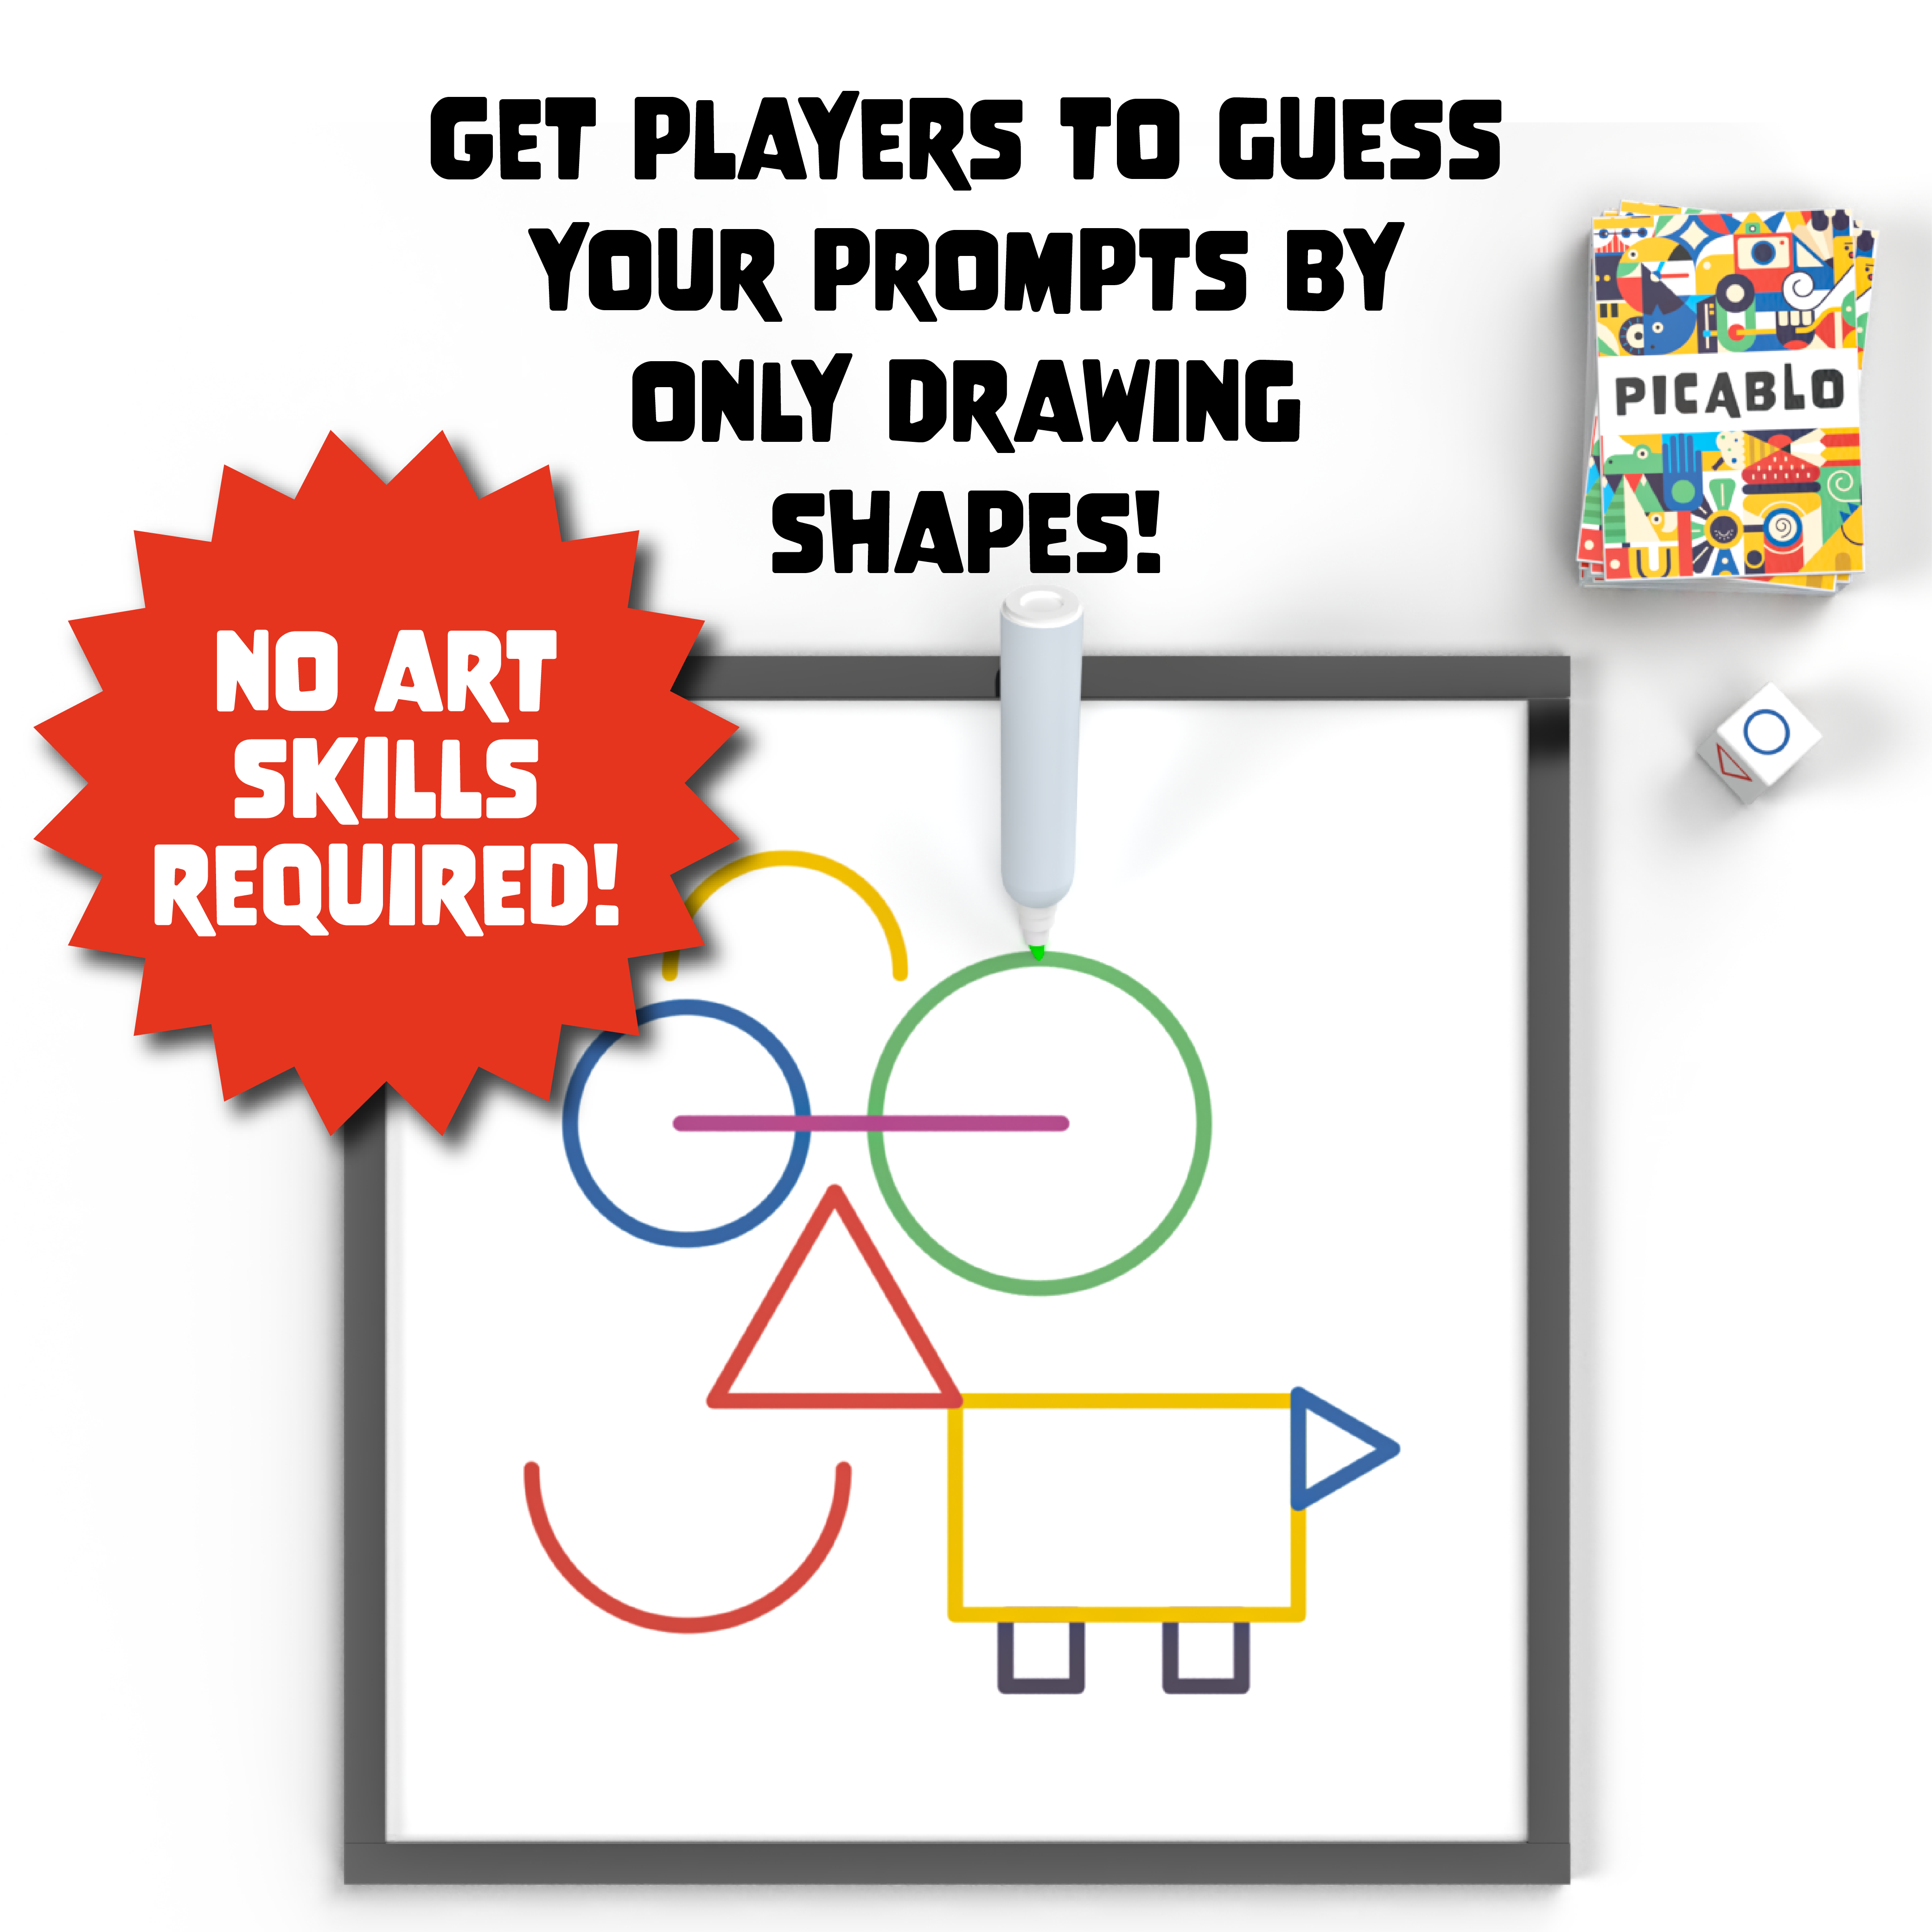 19 Enigmatic Facts About Pictionary (drawing And Guessing Game) - Facts.net